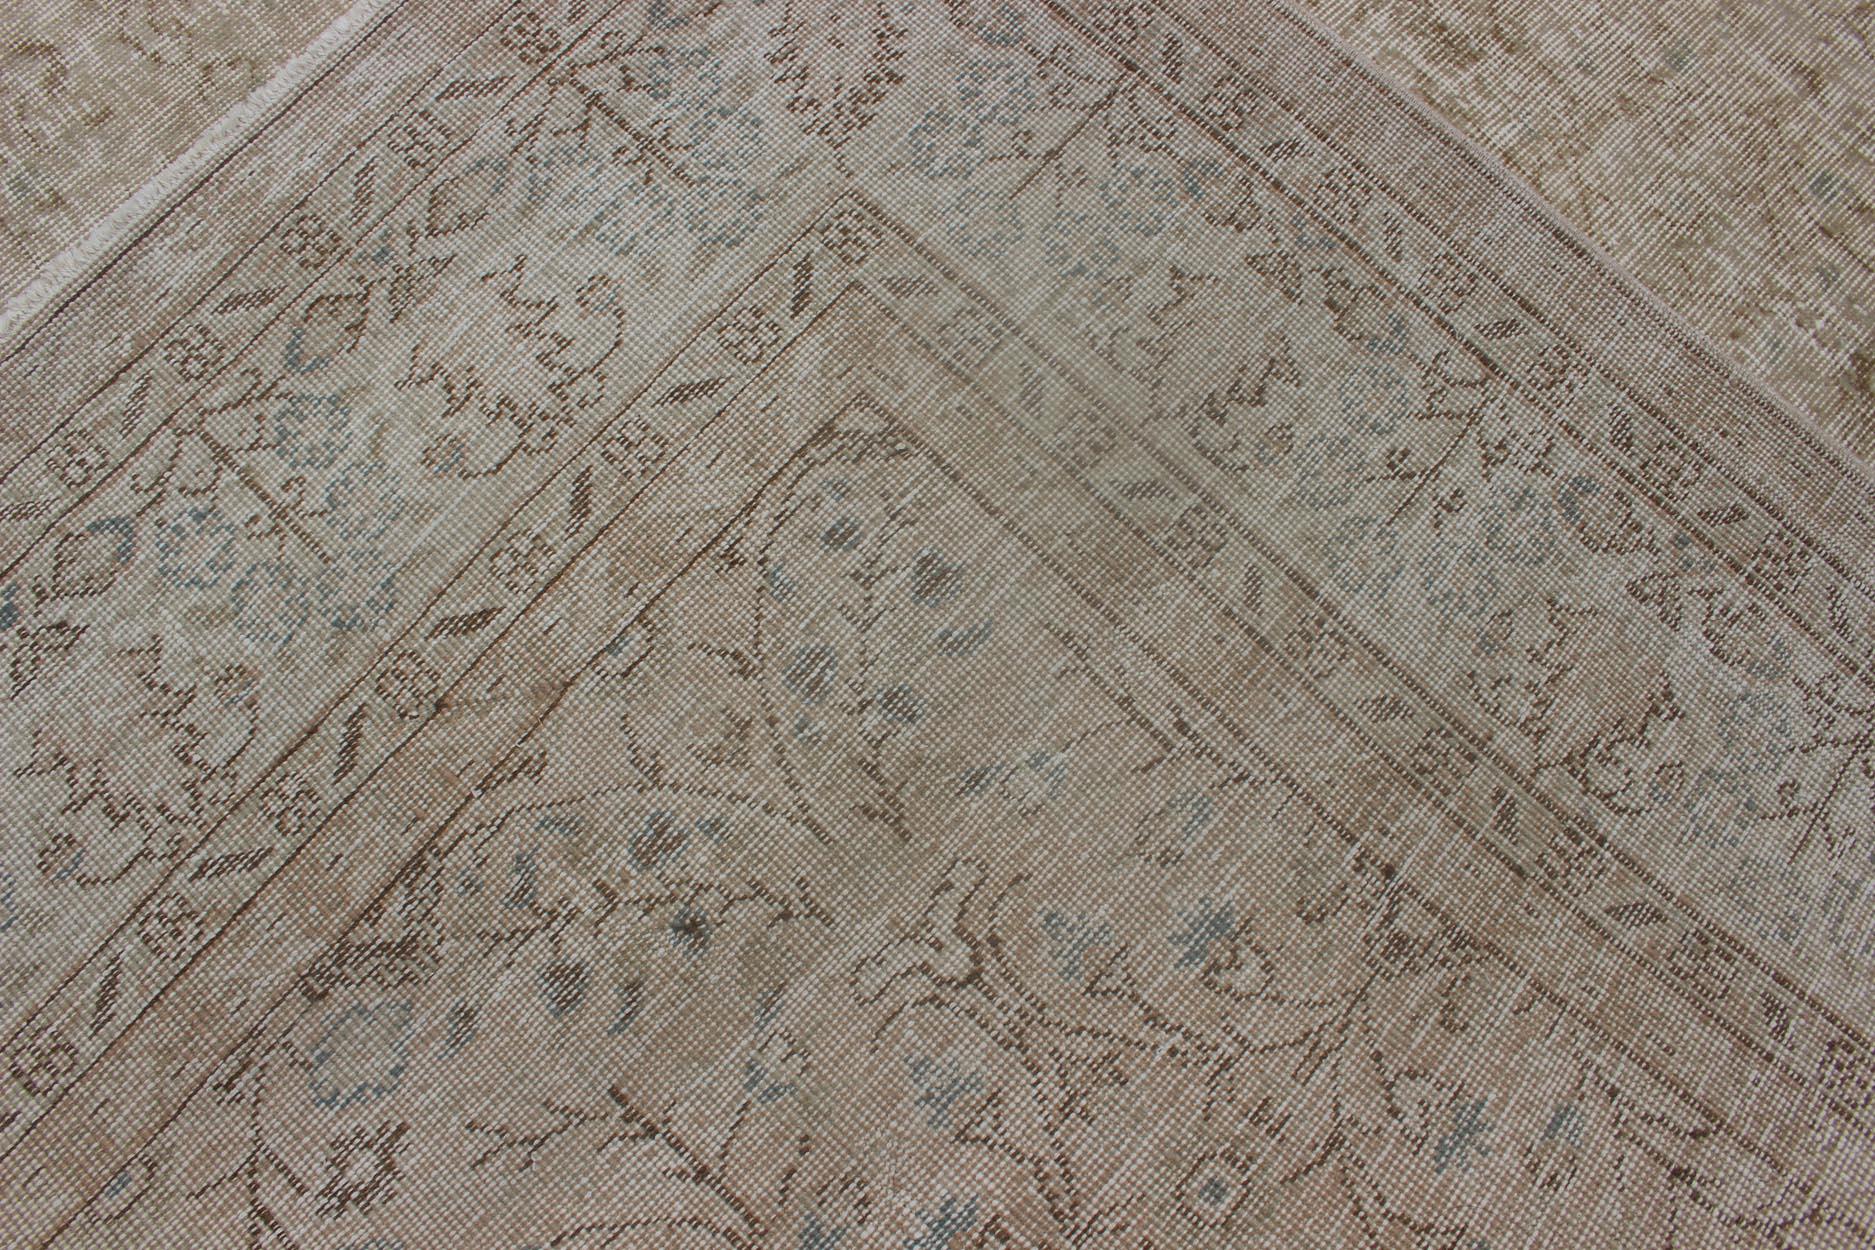 Vintage Distressed Turkish Rug with All-Over Pattern in Light Cream, Light Brown For Sale 1